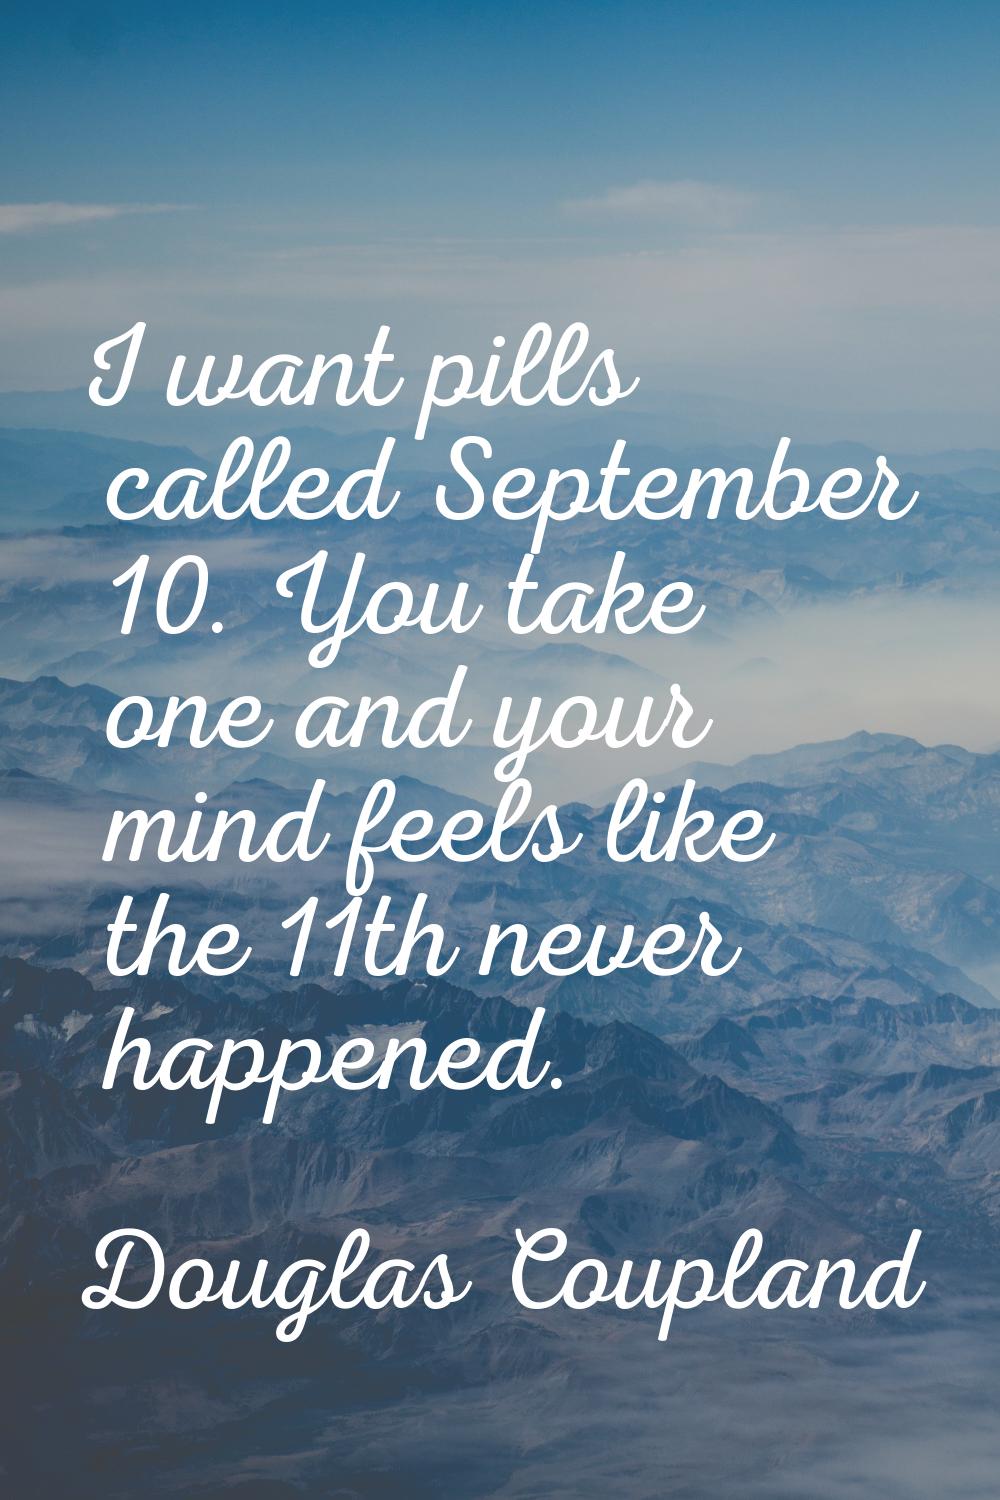 I want pills called September 10. You take one and your mind feels like the 11th never happened.